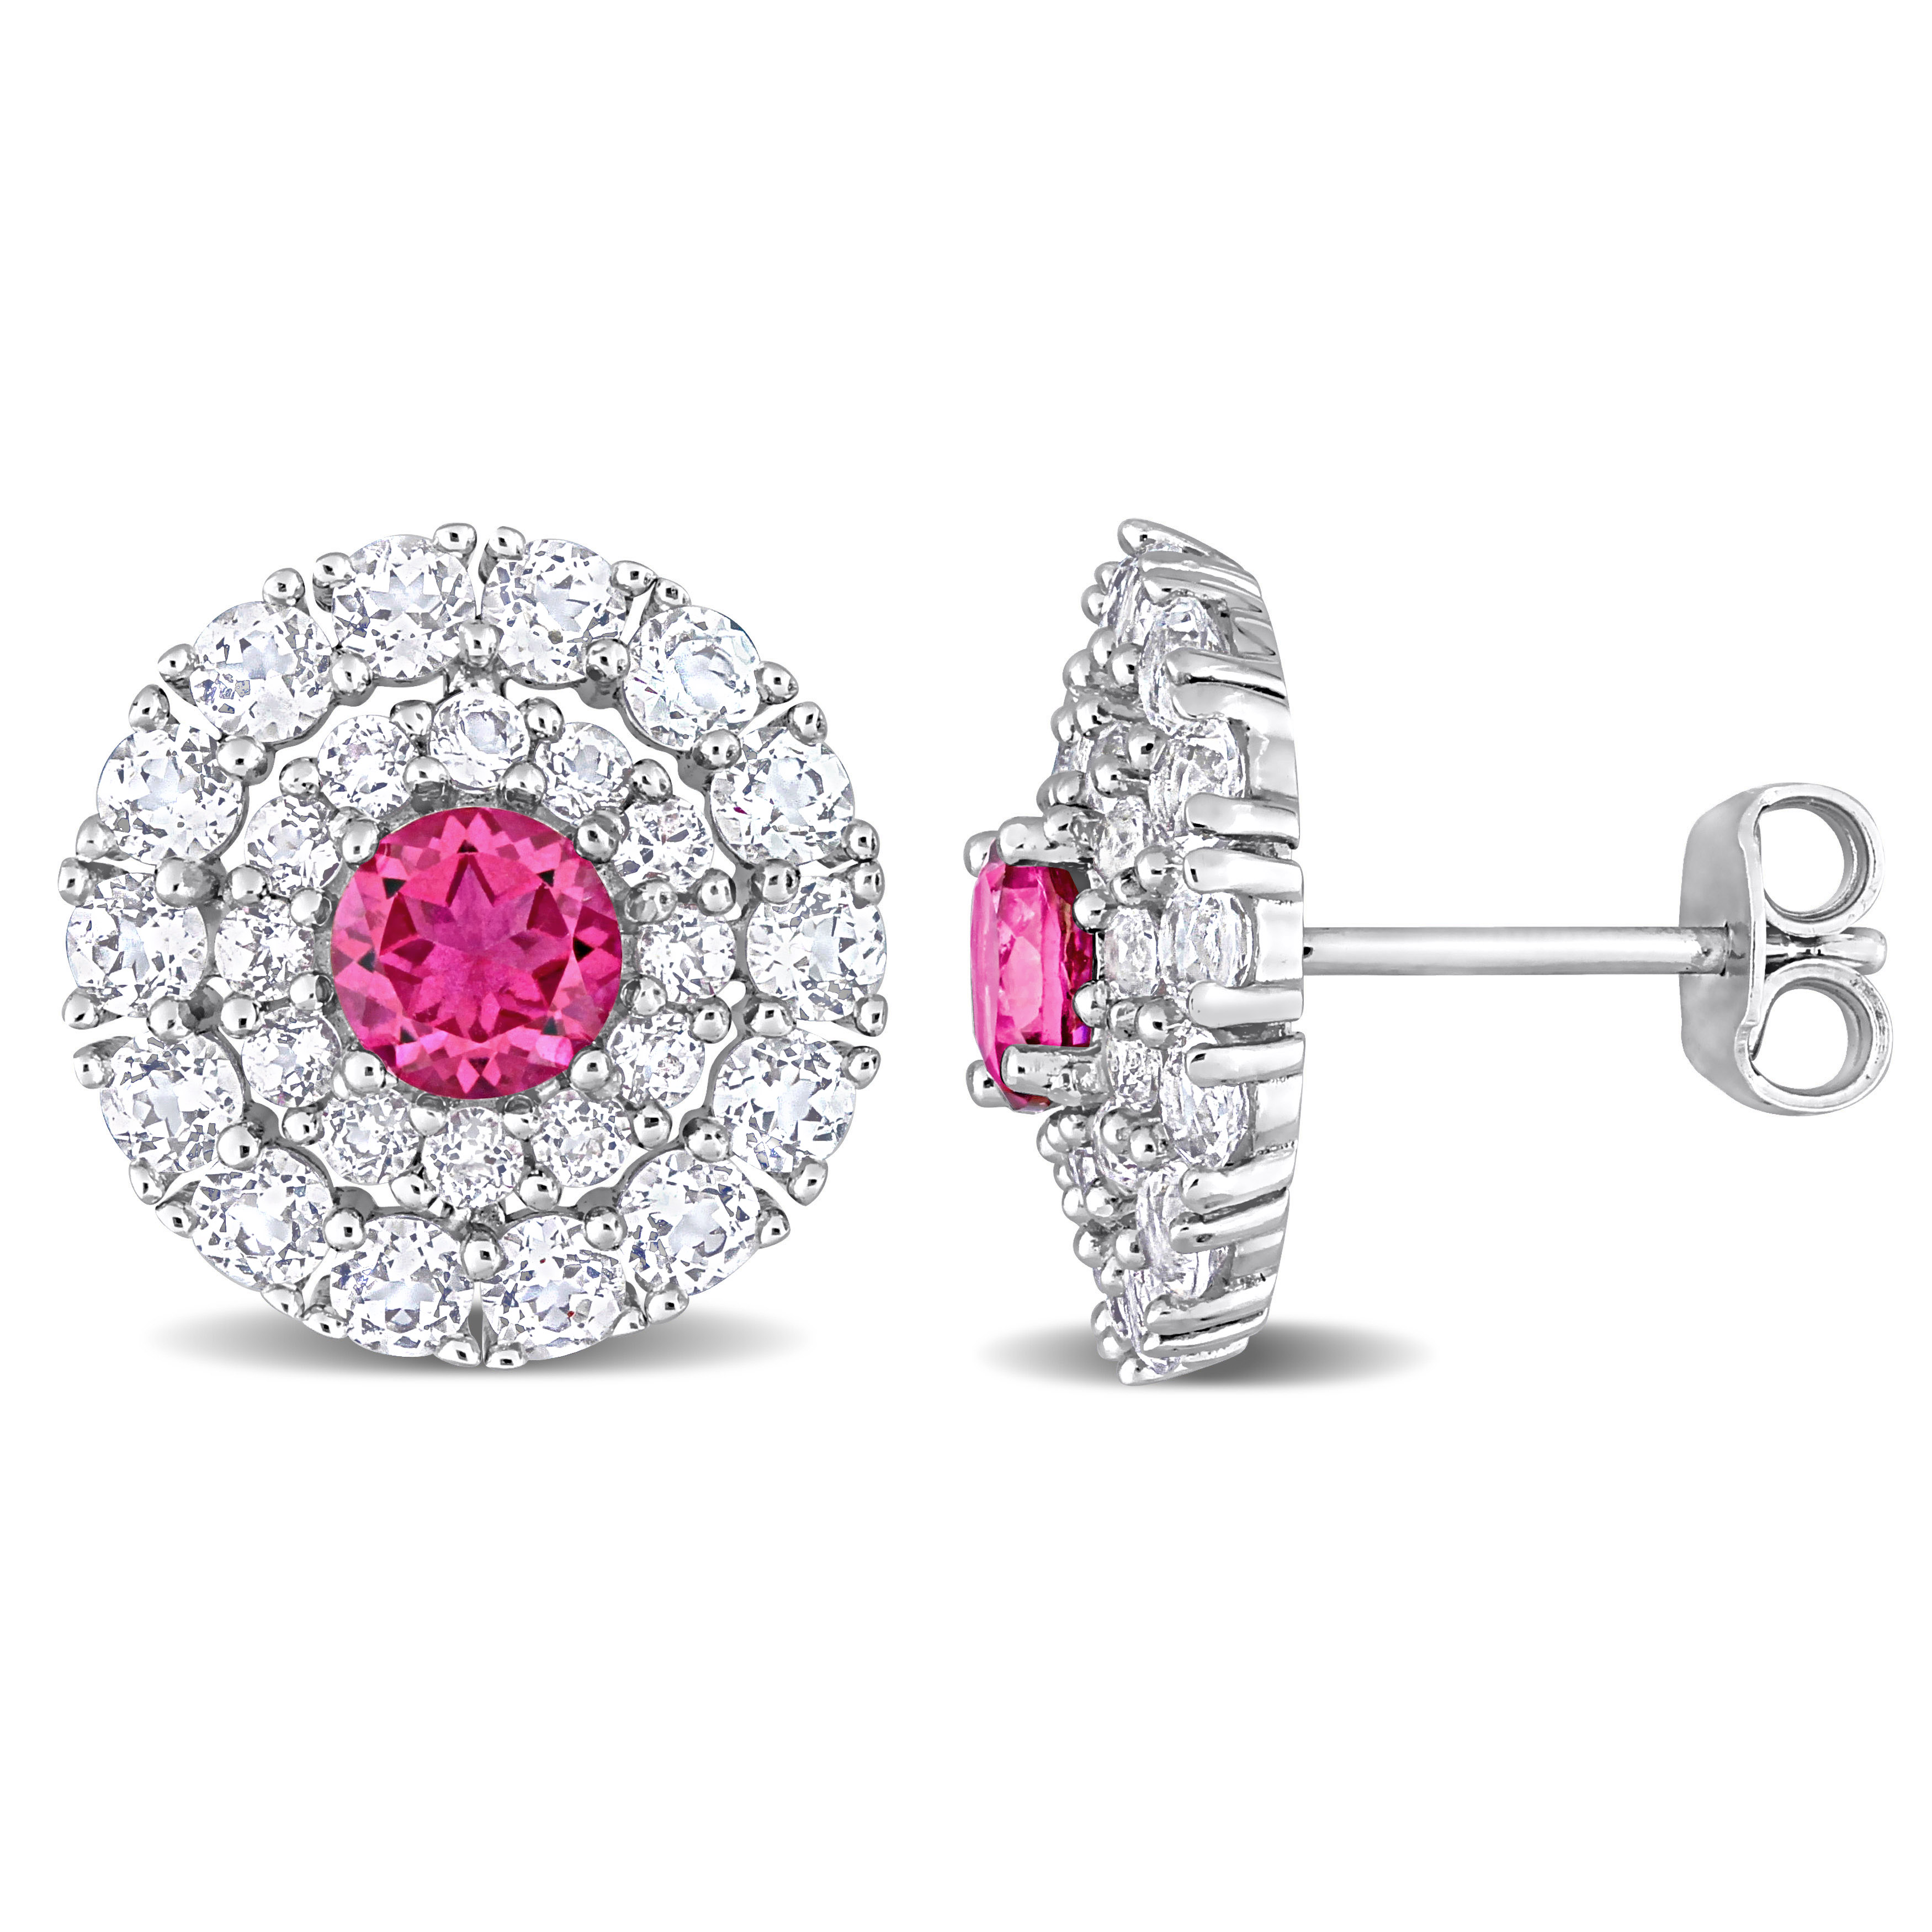 4 3/8 CT TGW Pink Topaz and White Topaz Double Halo Stud Earrings in Sterling Silver